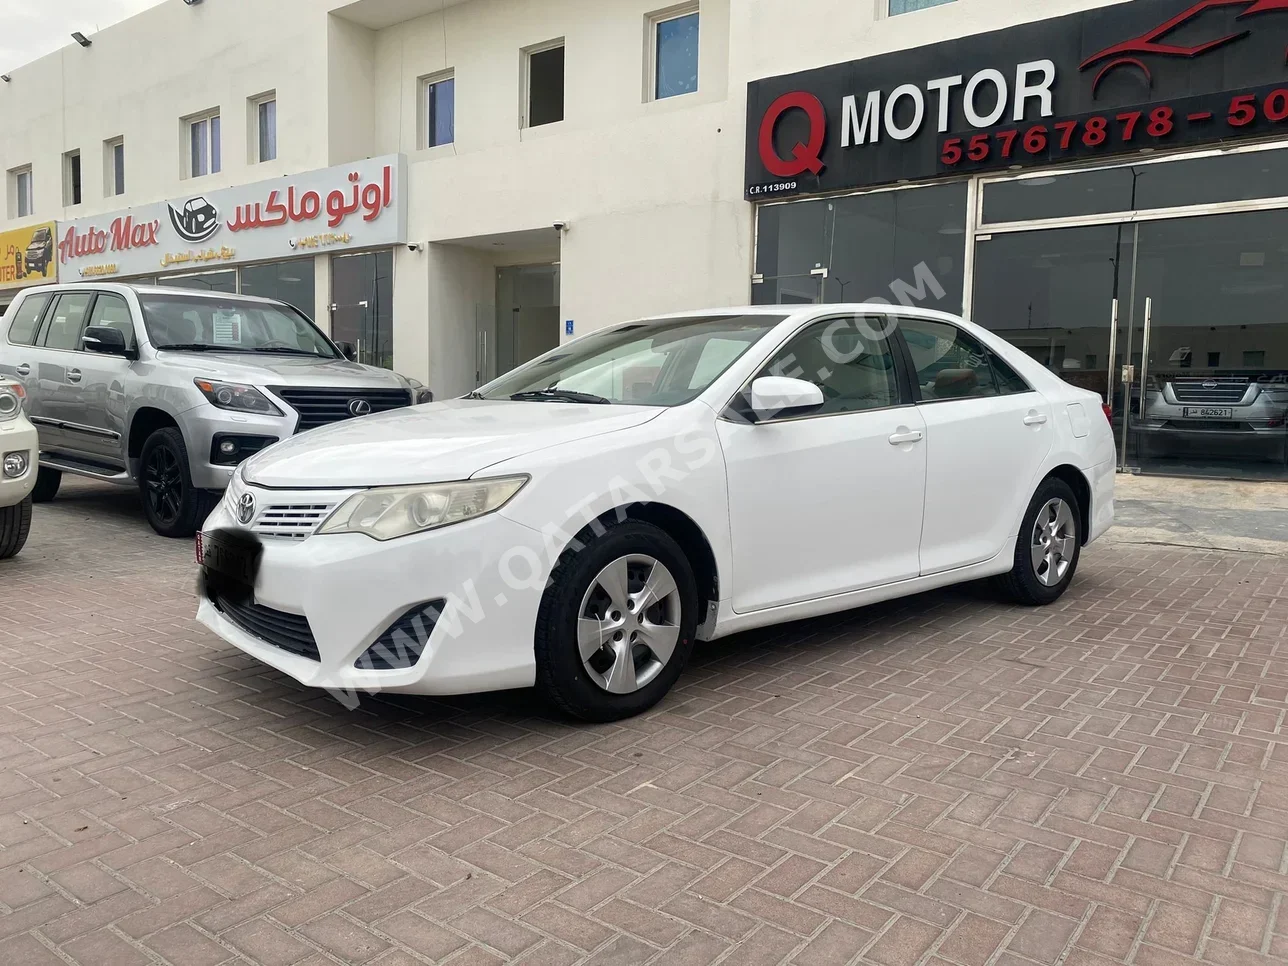 Toyota  Camry  GL  2014  Automatic  265,000 Km  4 Cylinder  Front Wheel Drive (FWD)  Sedan  White